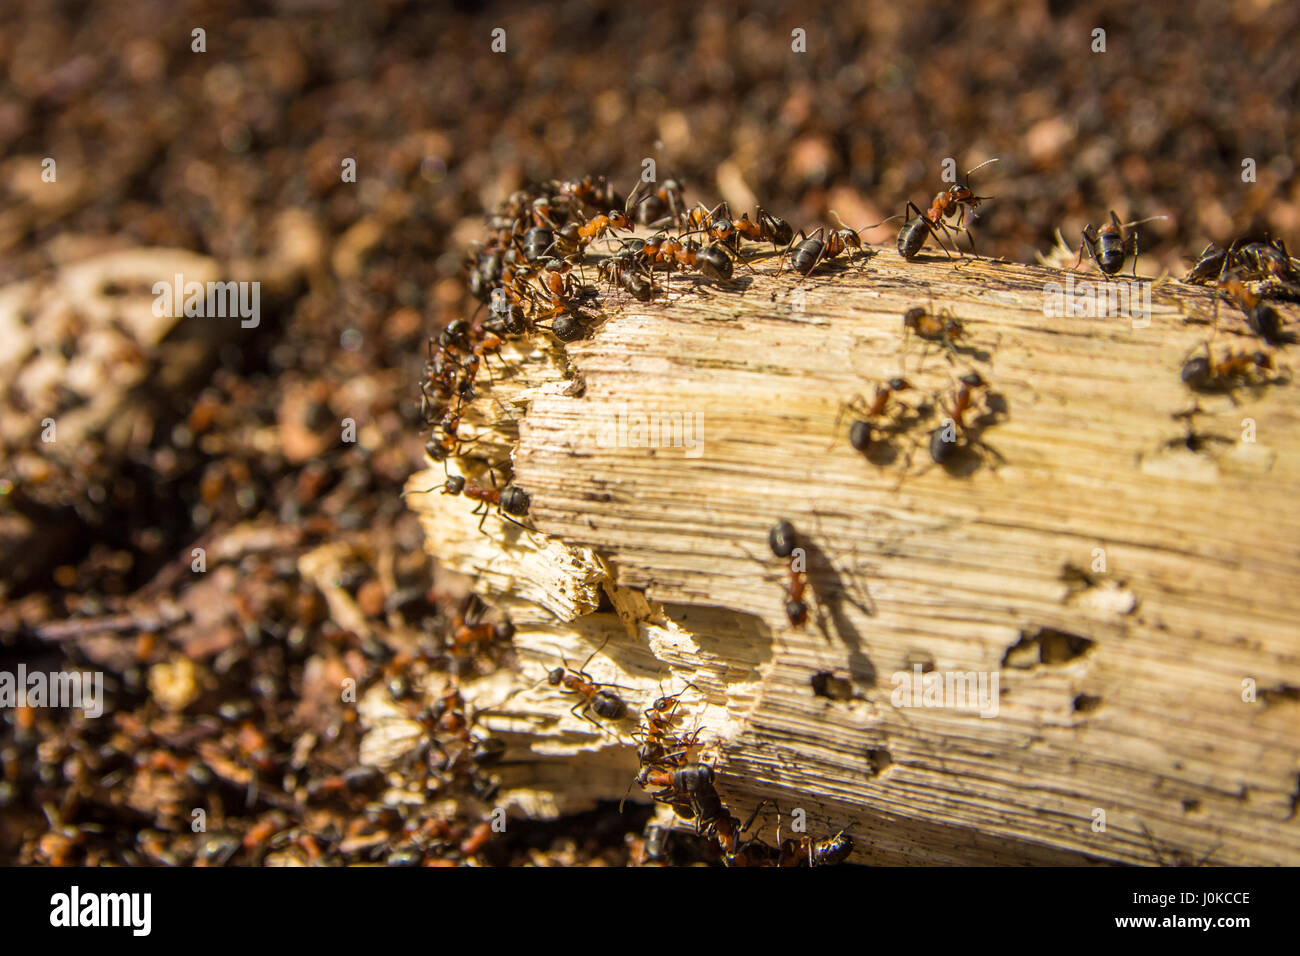 european red ants swarming over log Stock Photo